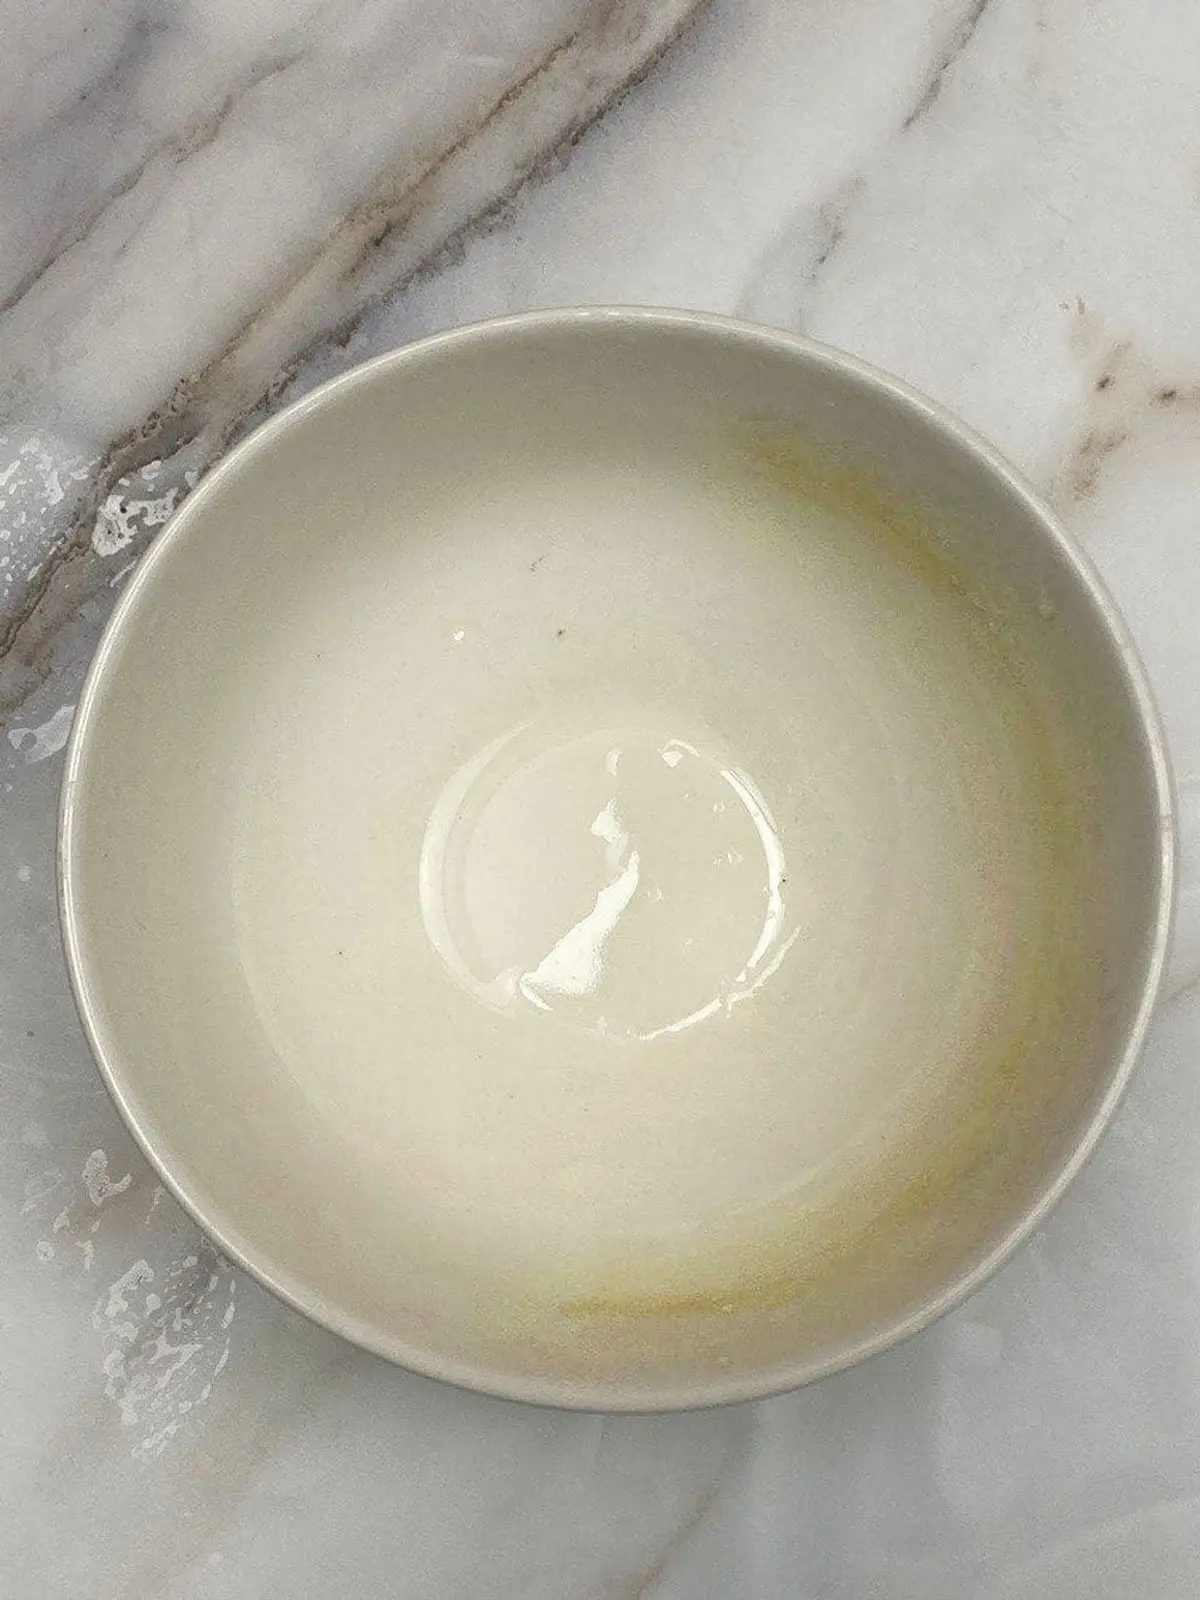 After Cleaning Stain on Ceramic with Baking Soda and Vinegar